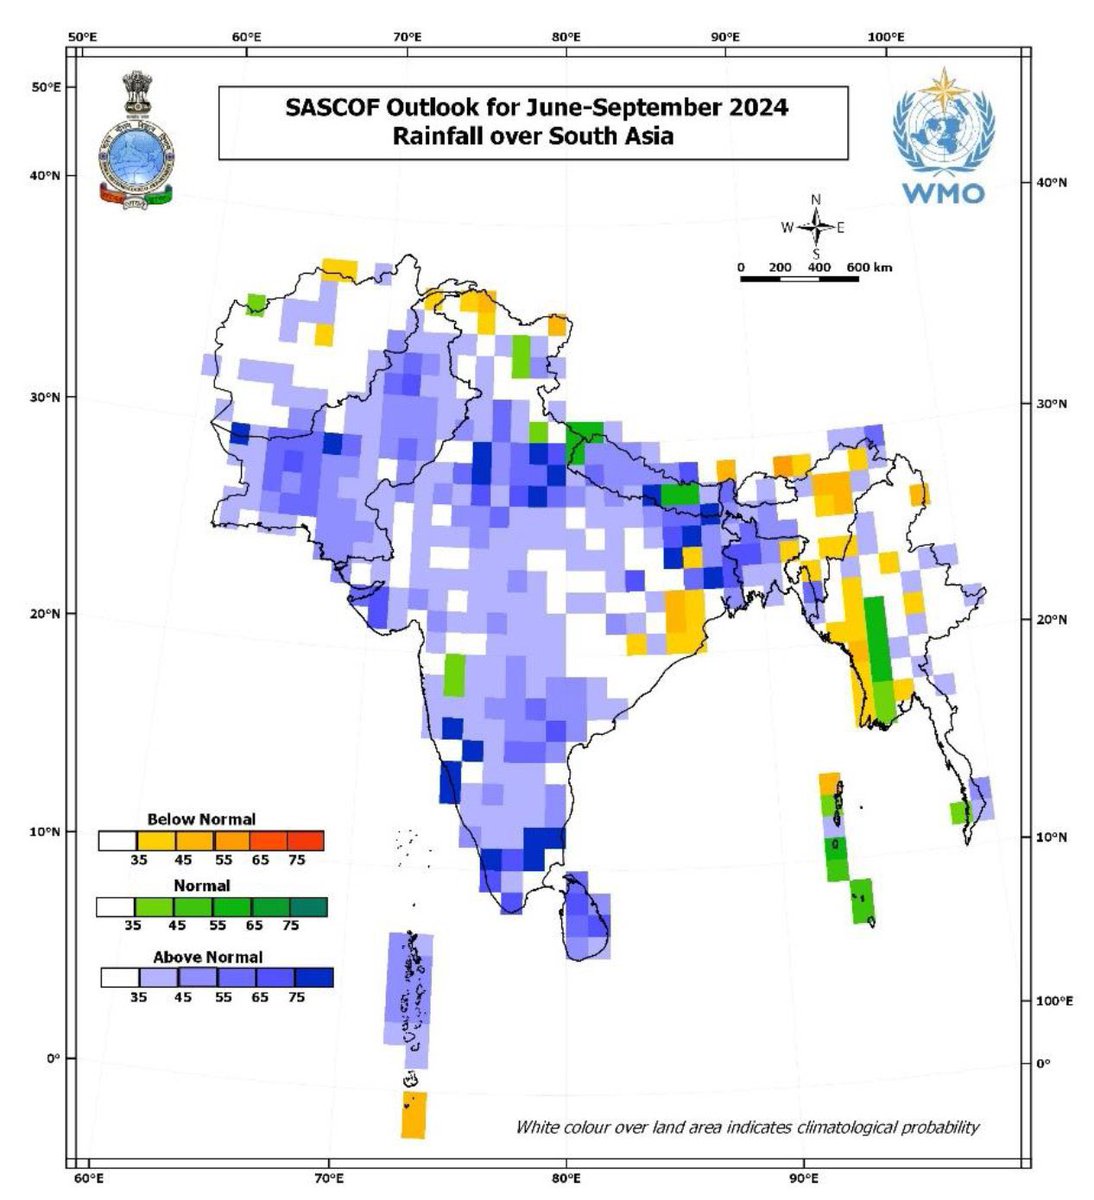 Above normal #Monsoon2024 expected in South Asia, including flood prone parts of Upper Sindh, South KP, and Baluchistan — along the Indus and lake regions. Via @RockSea